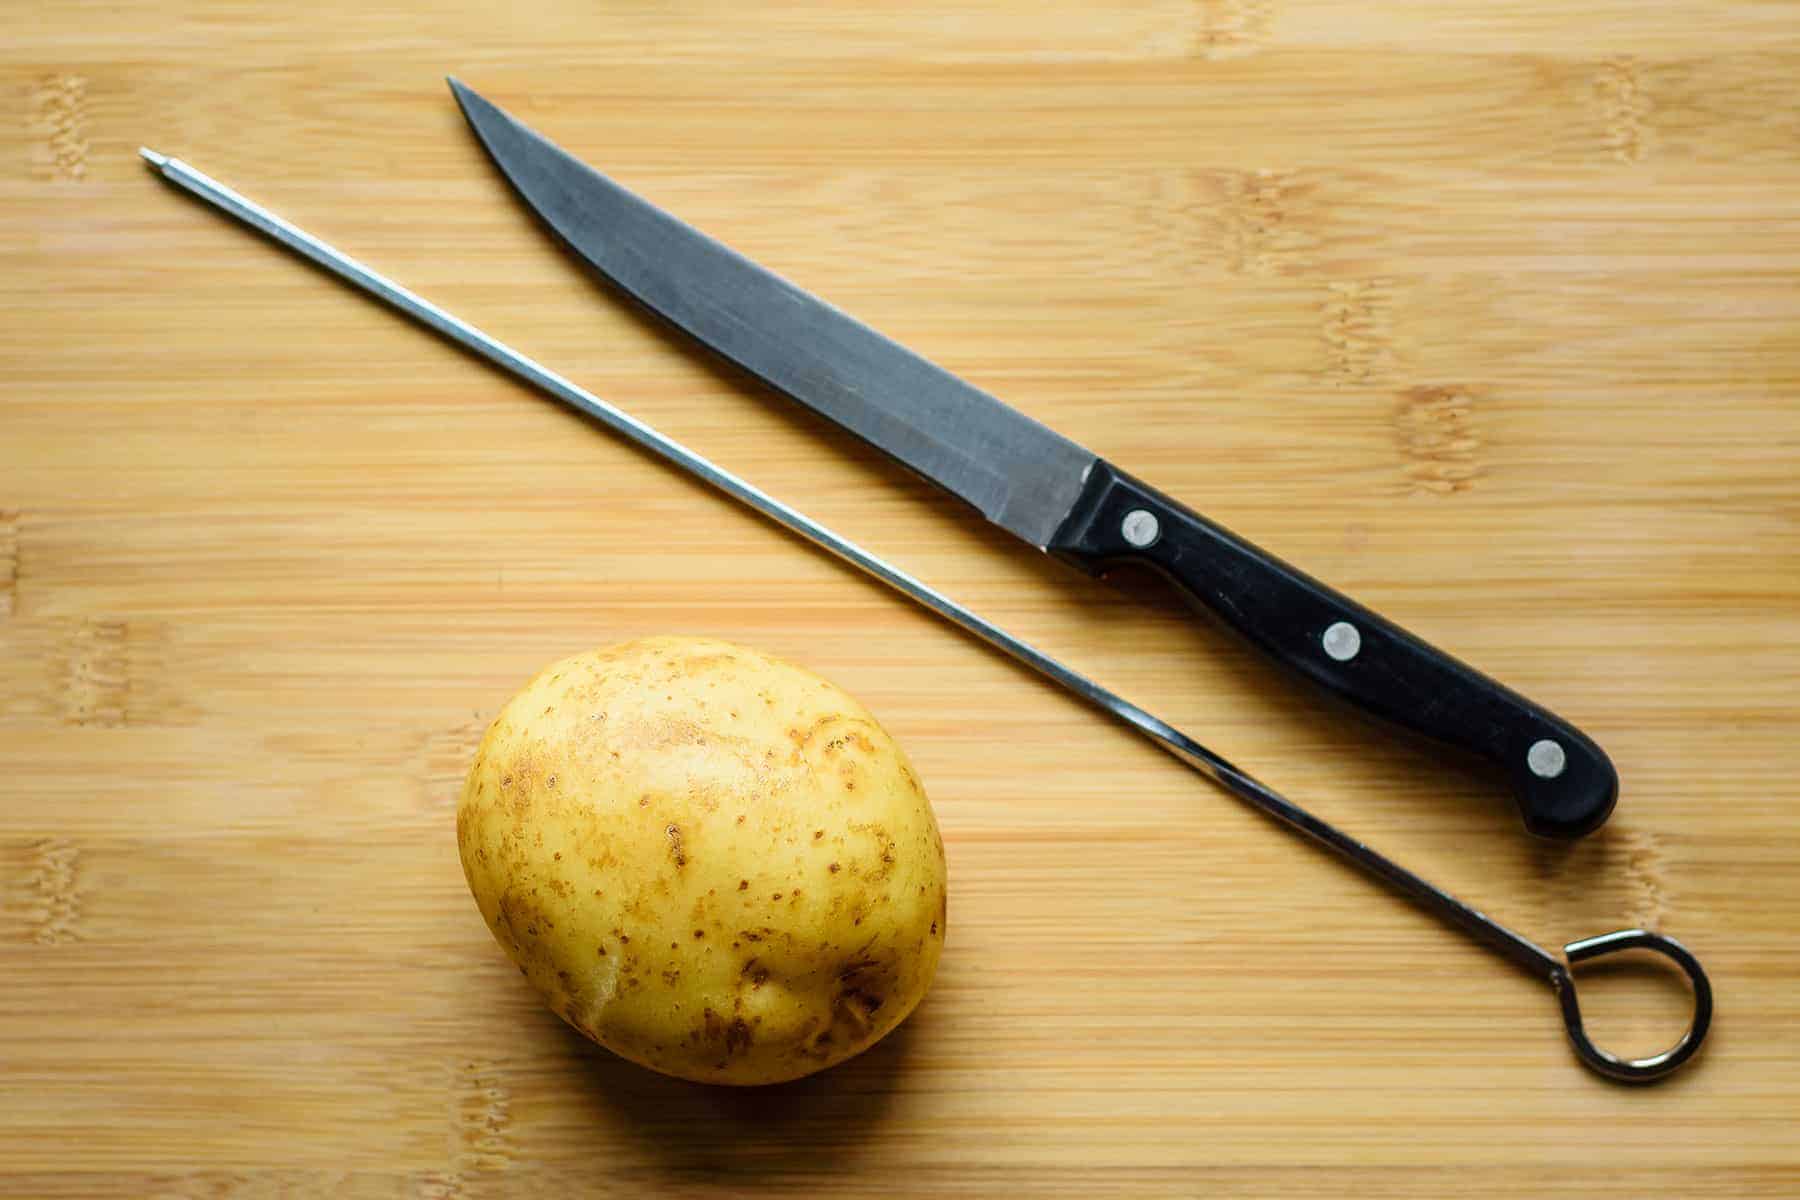 View of knife and skewer with potato